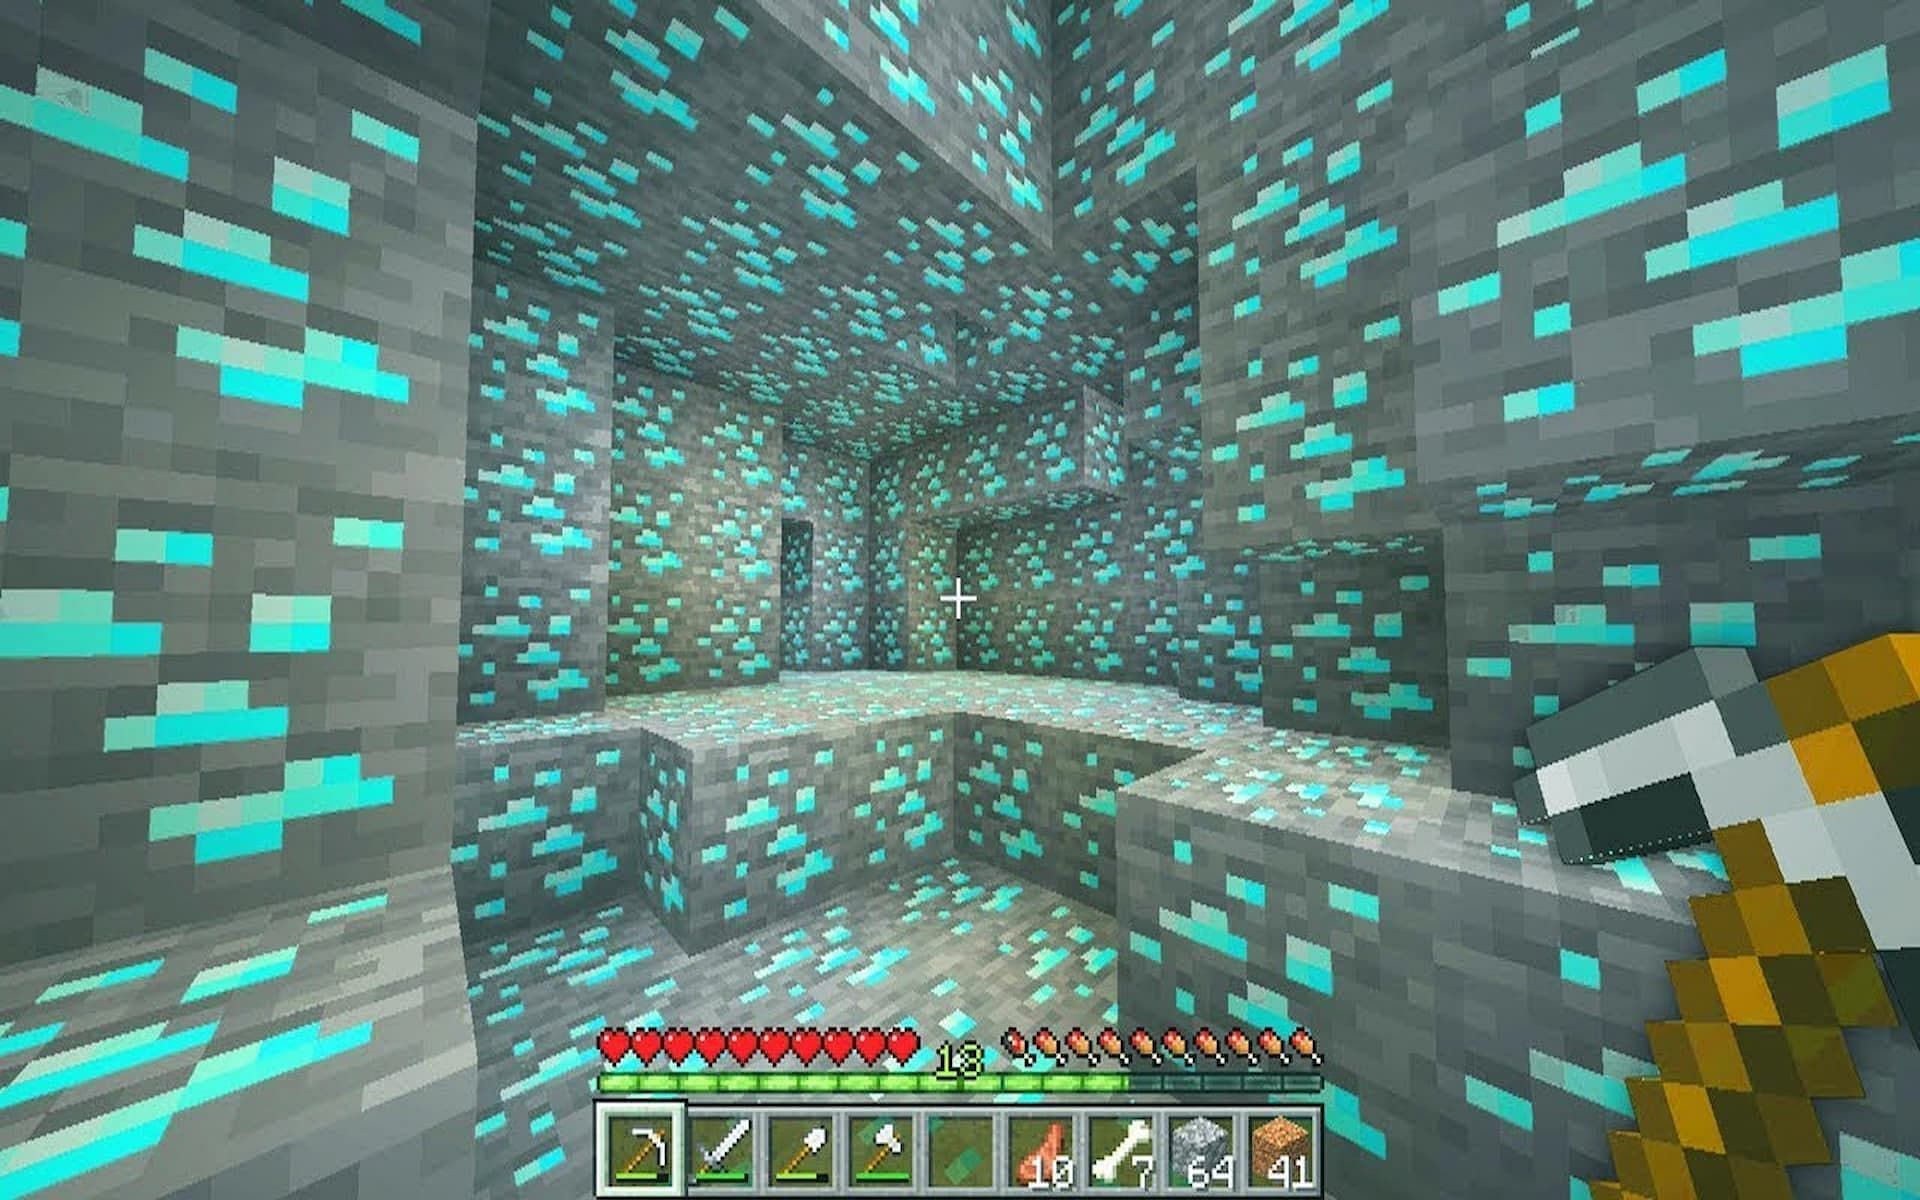 Players can find diamonds if they know where to look (Image via YouTube/Joshe)